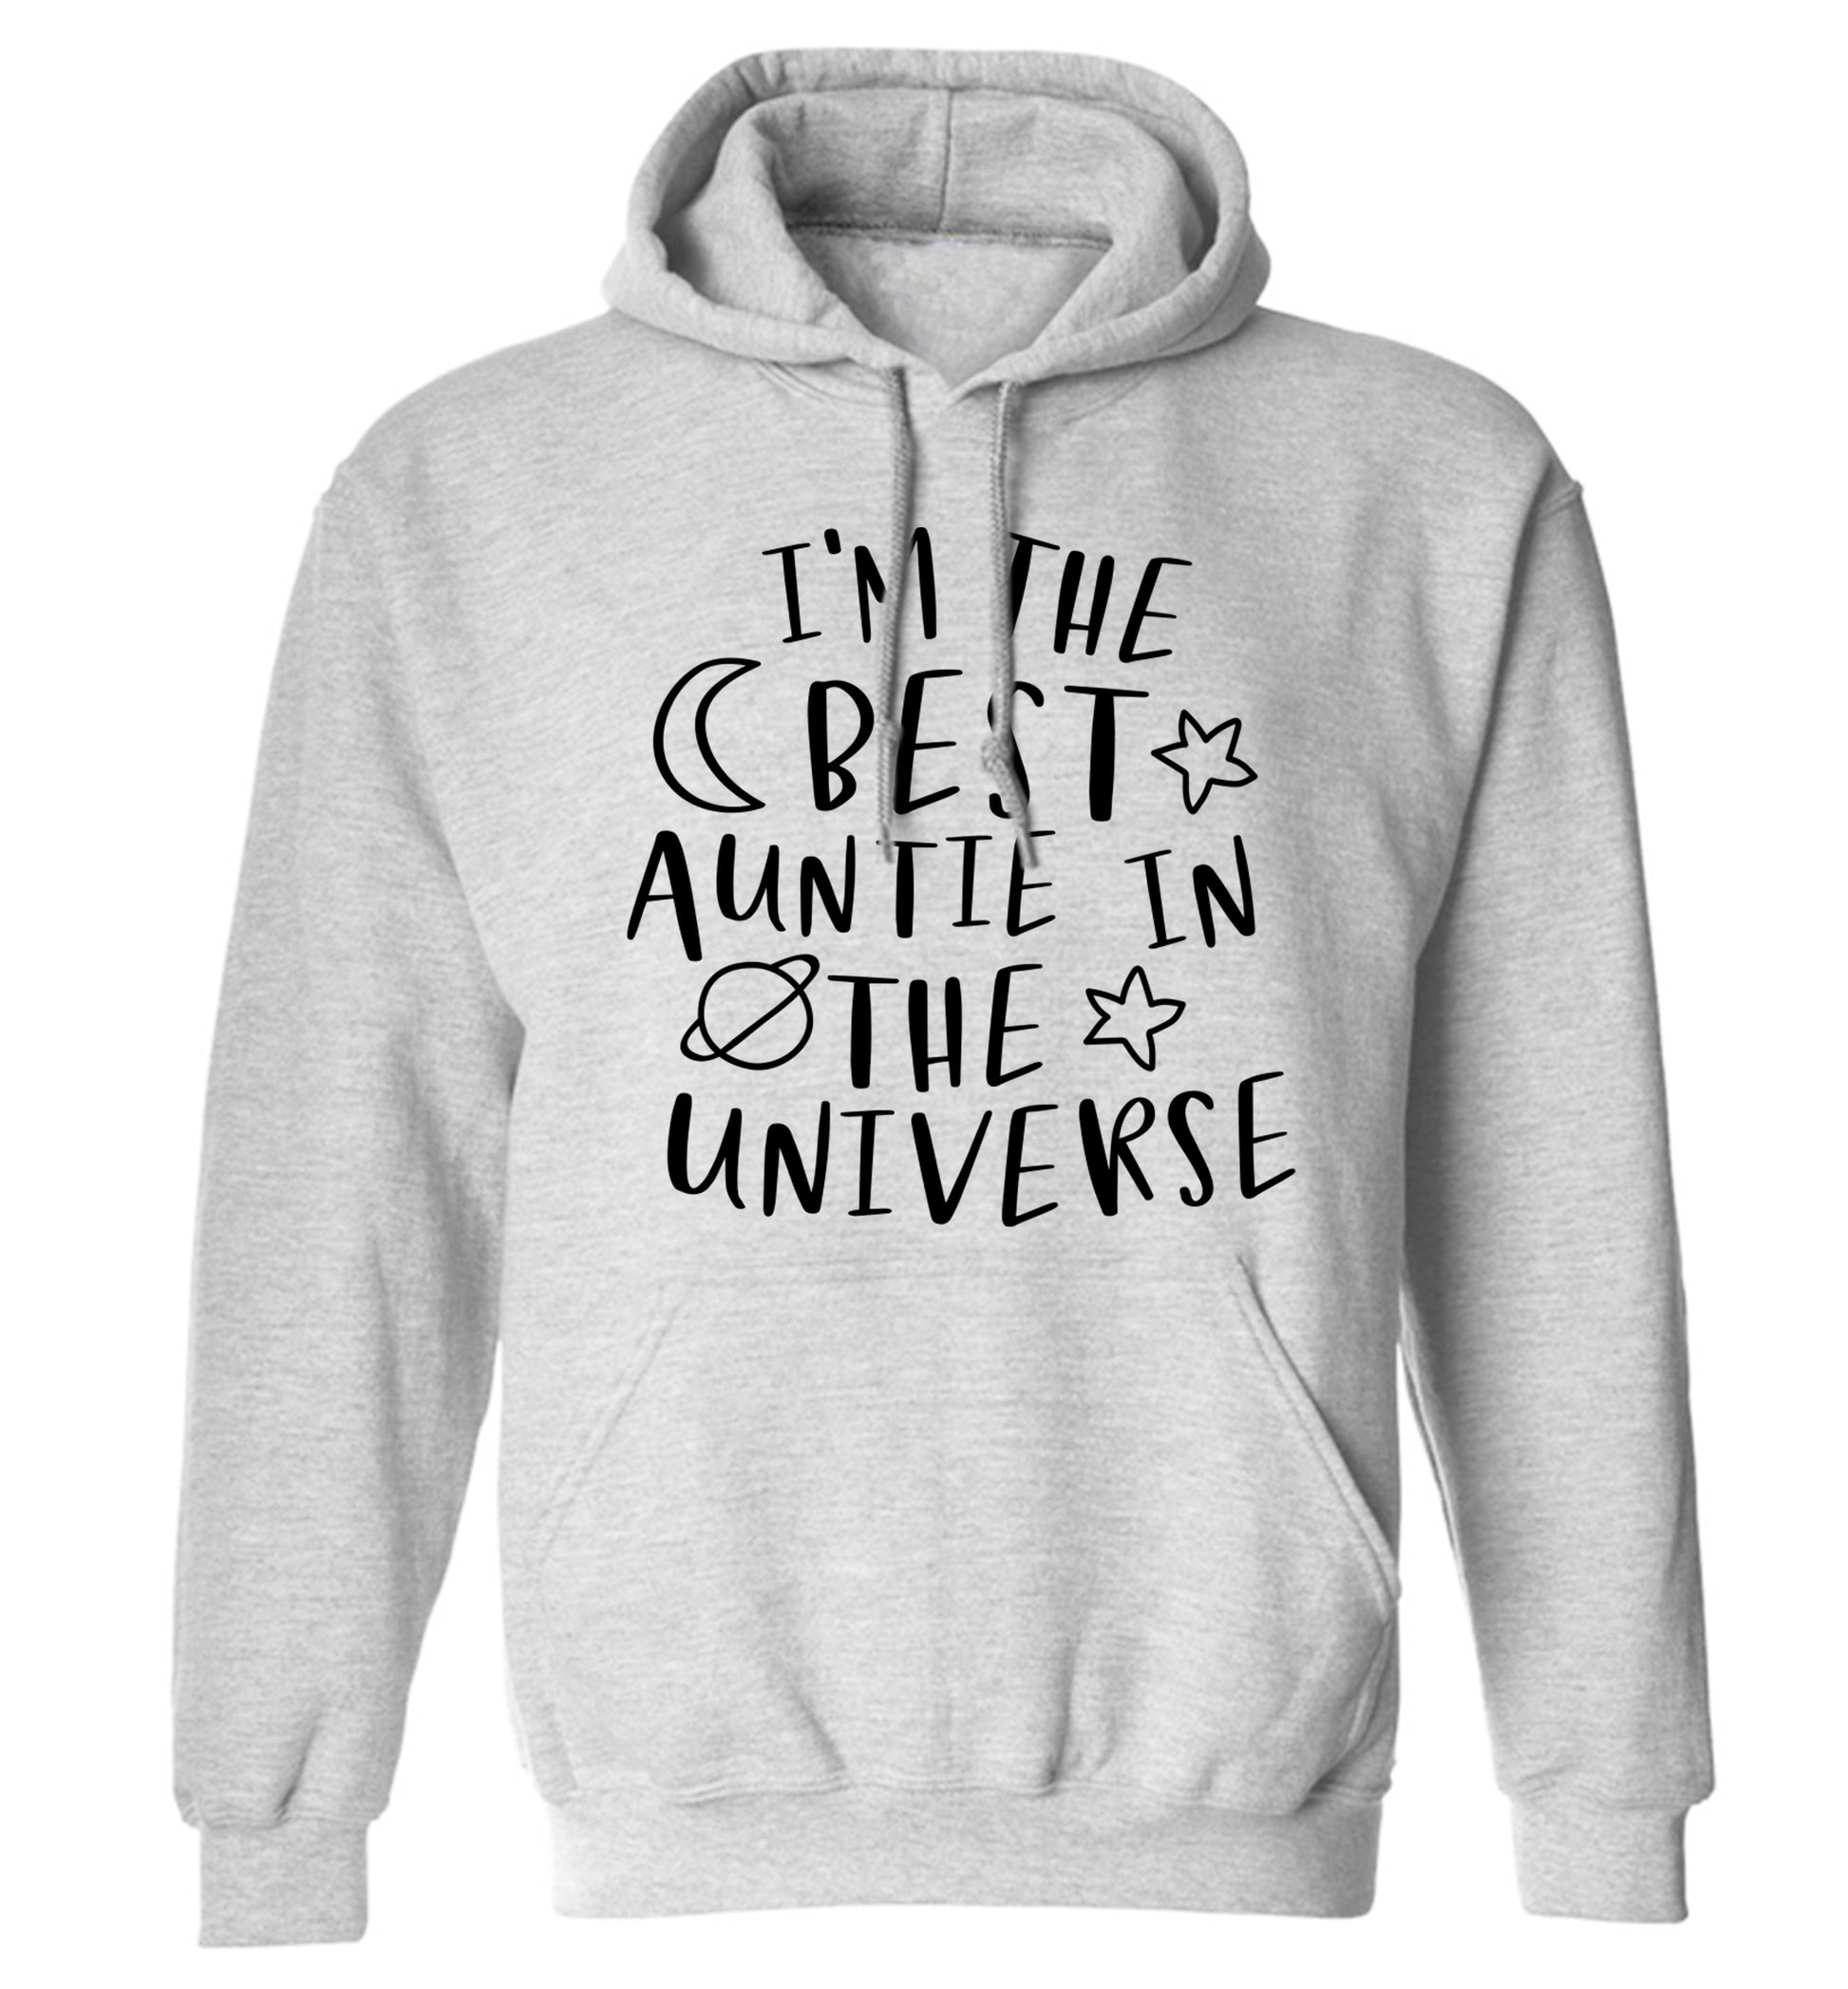 I'm the best auntie in the universe adults unisex grey hoodie 2XL